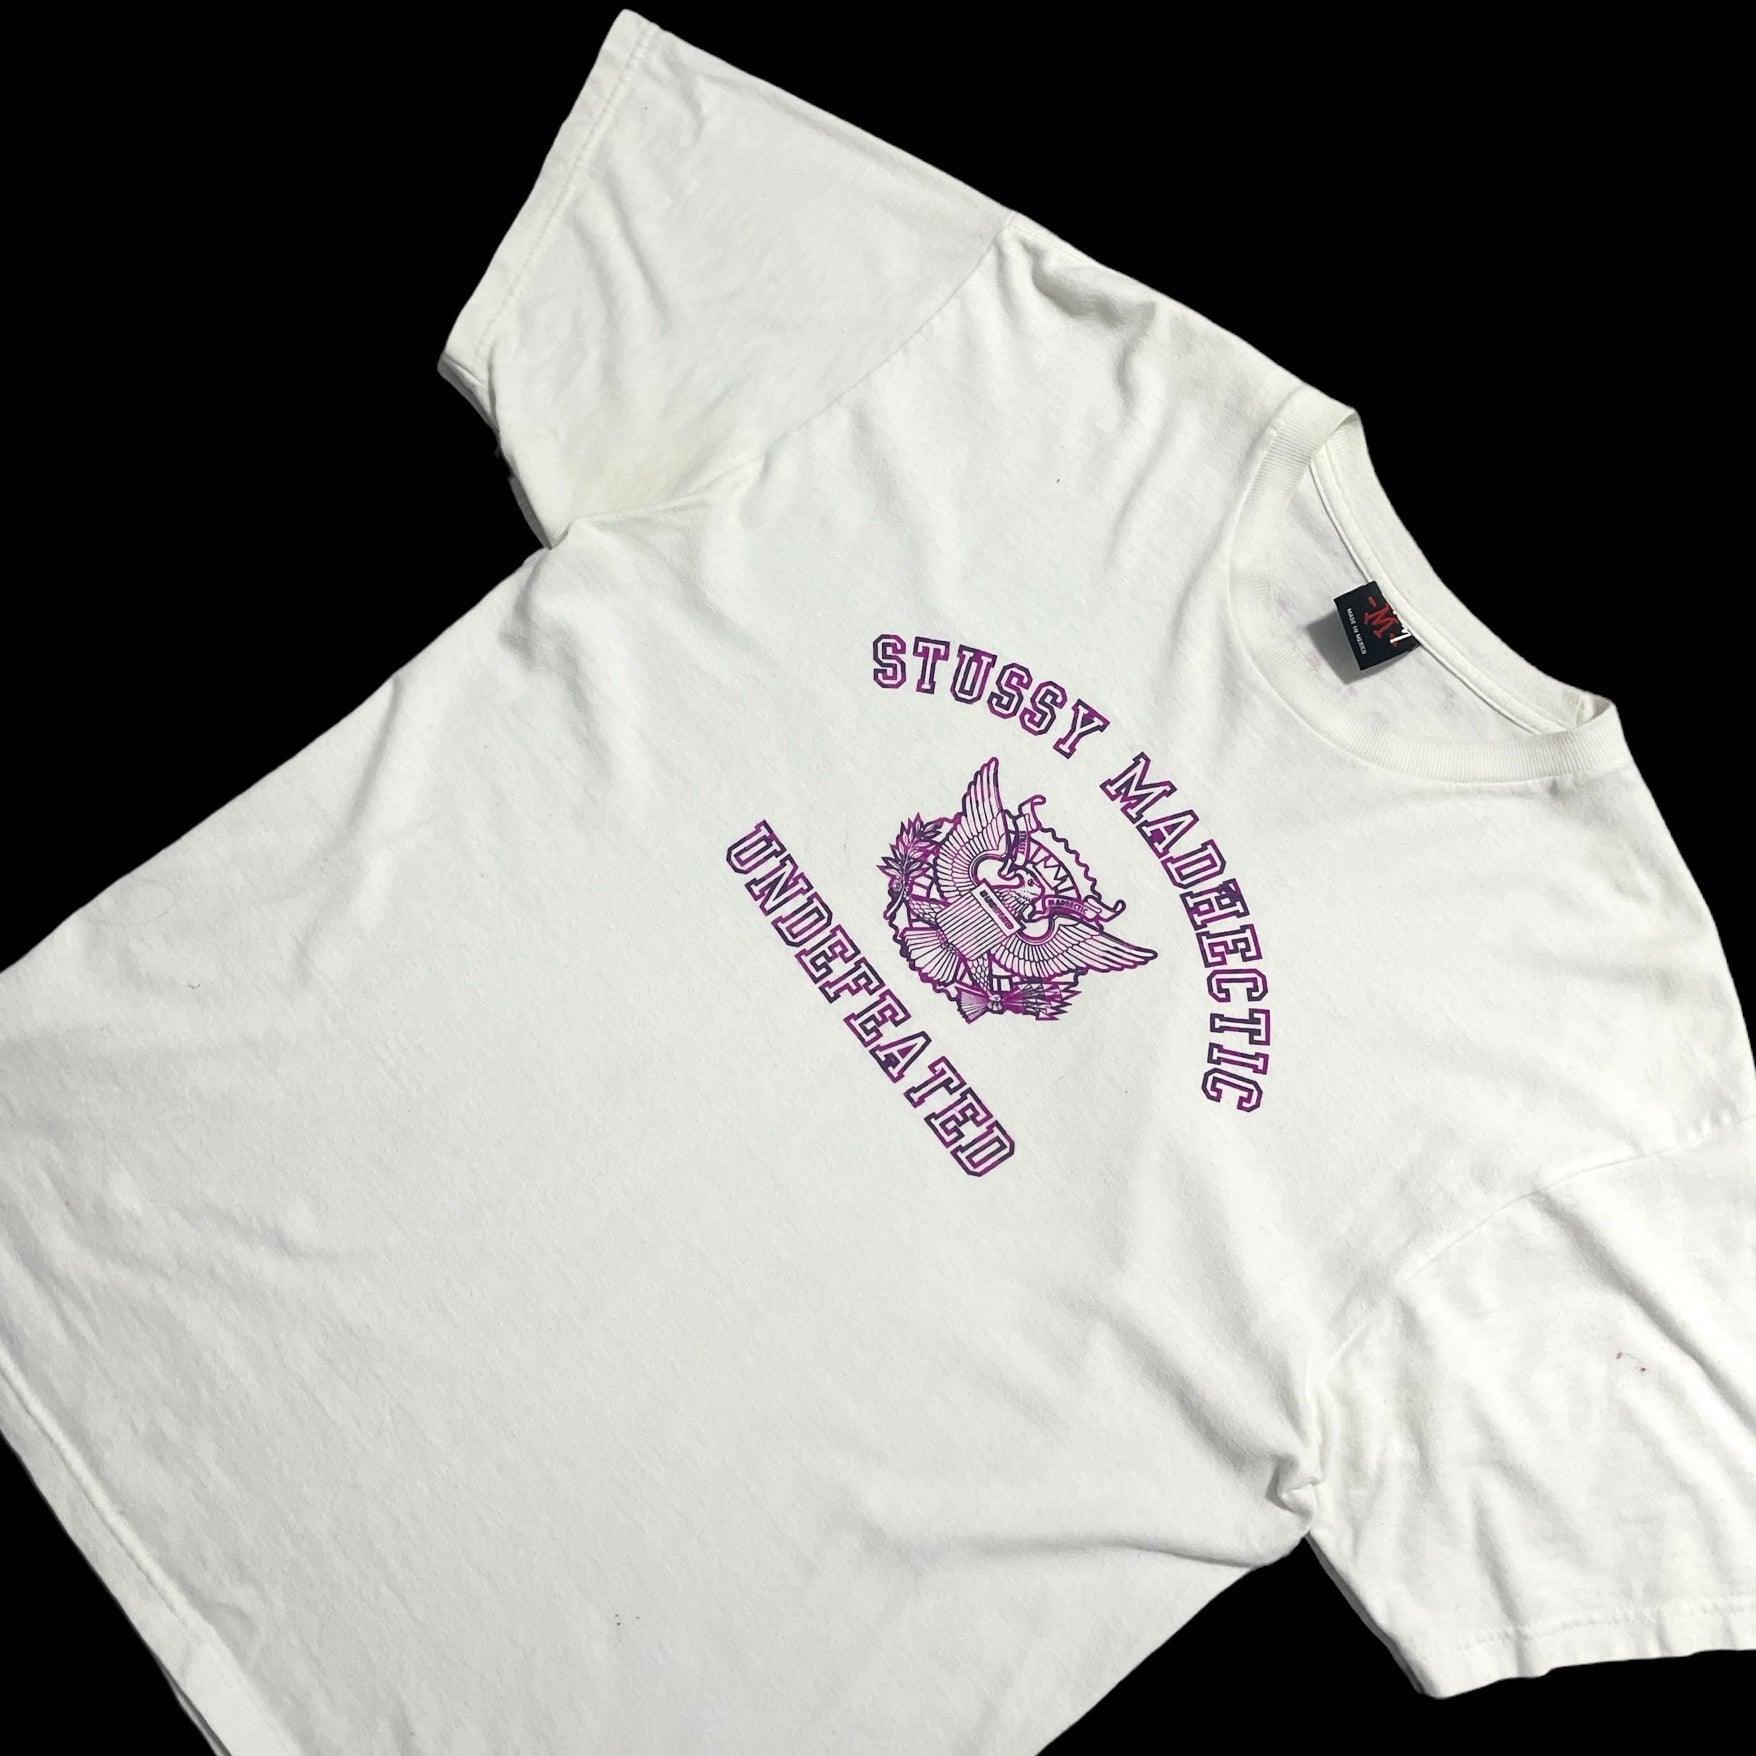 Stussy x Undefeated Spell Out Short Sleeved T Shirt - Known Source